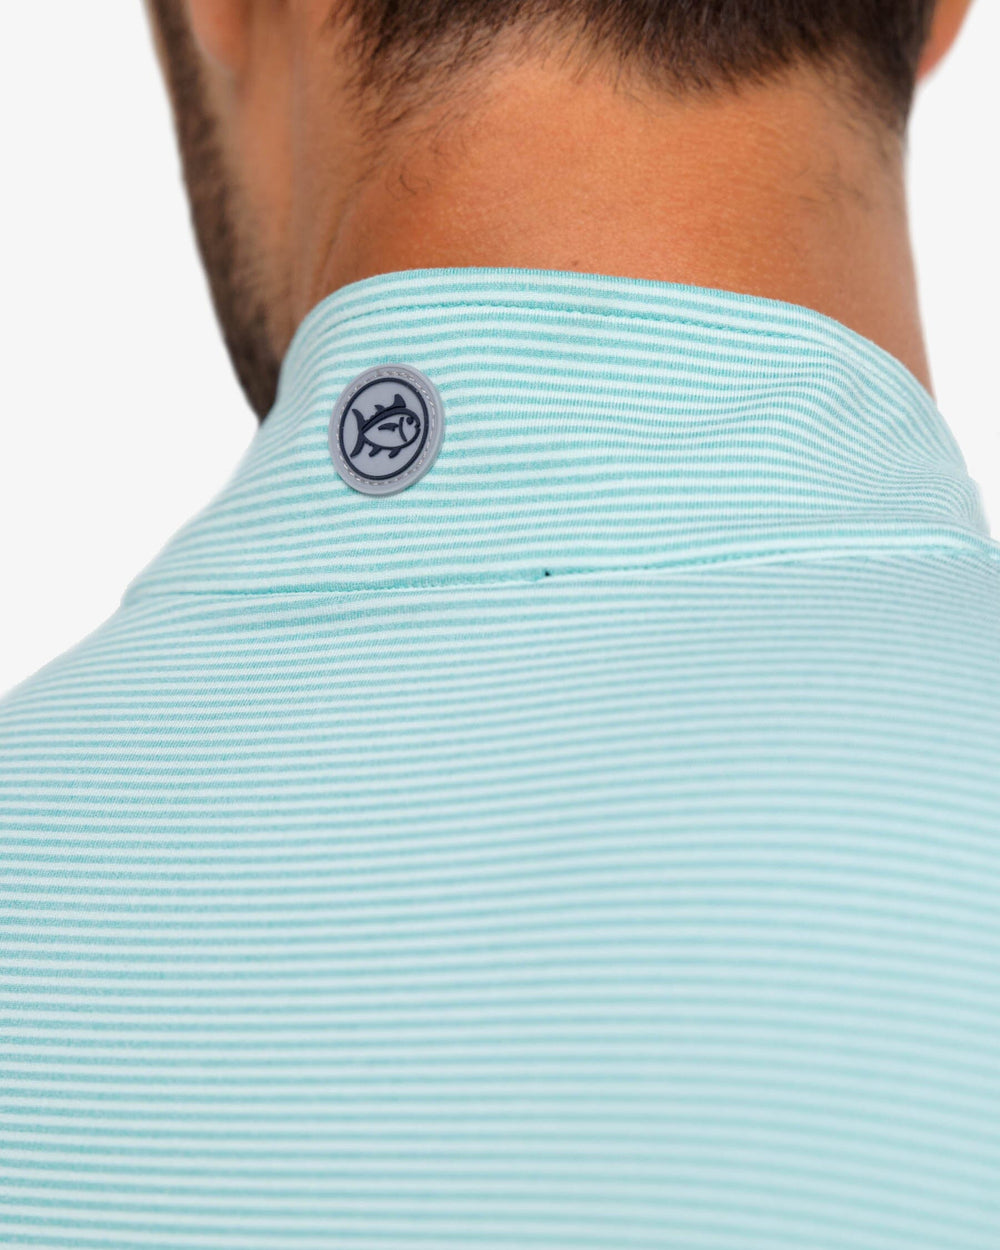 The yoke view of the Southern Tide Cruiser Heather Micro-Stripe Performance Quarter Zip by Southern Tide - Heather Tidal Wave